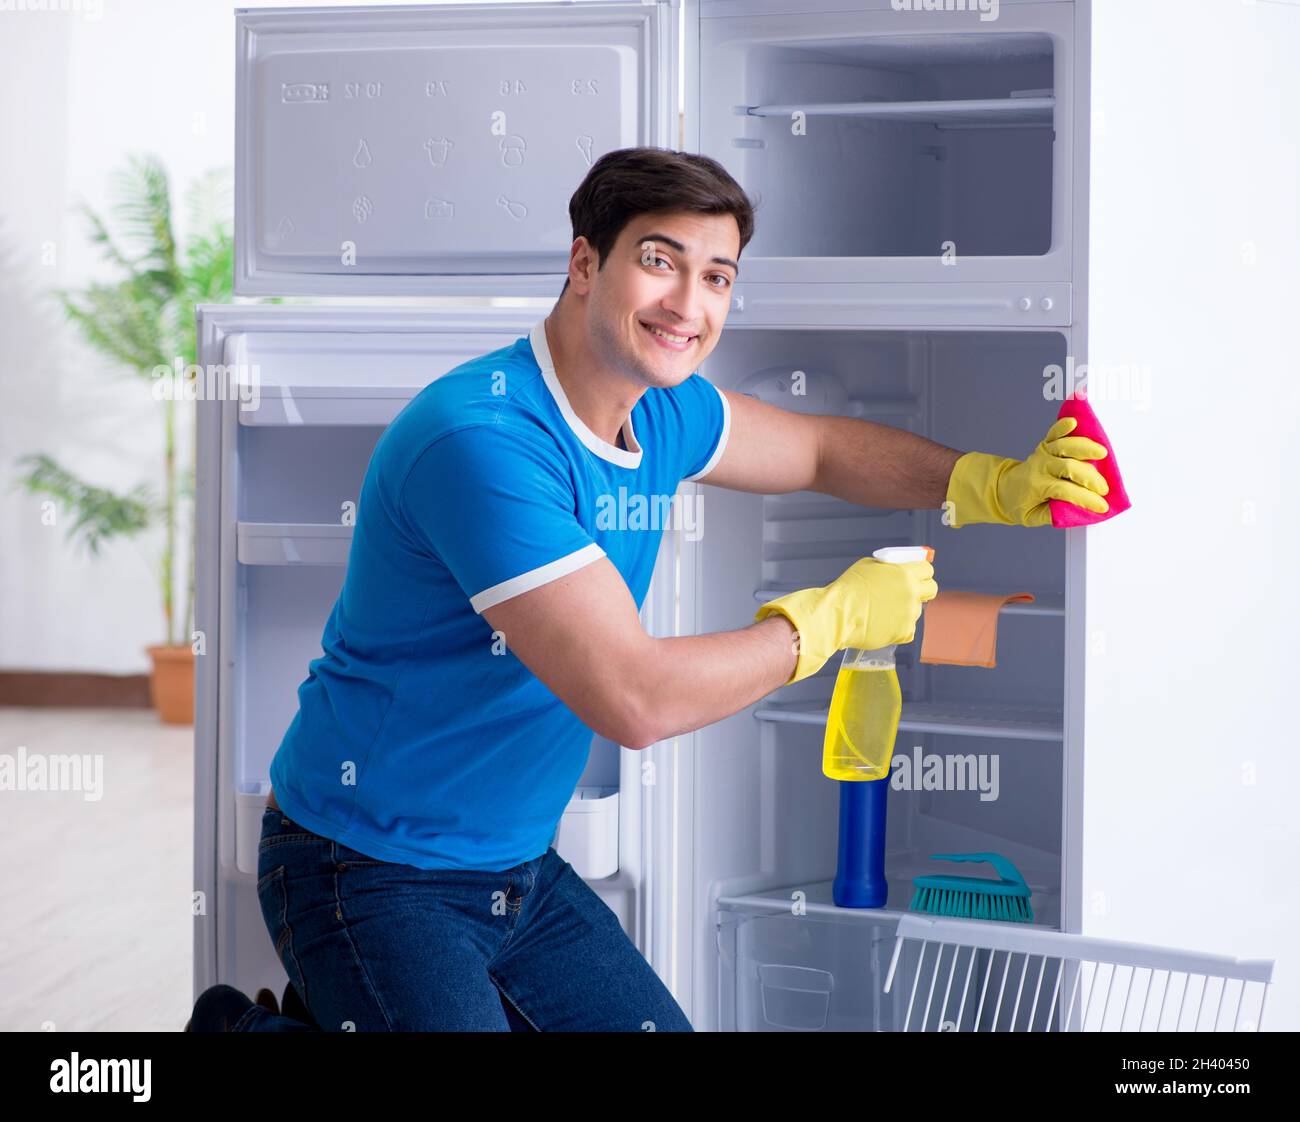 Man cleaning fridge in hygiene concept Stock Photo - Alamy